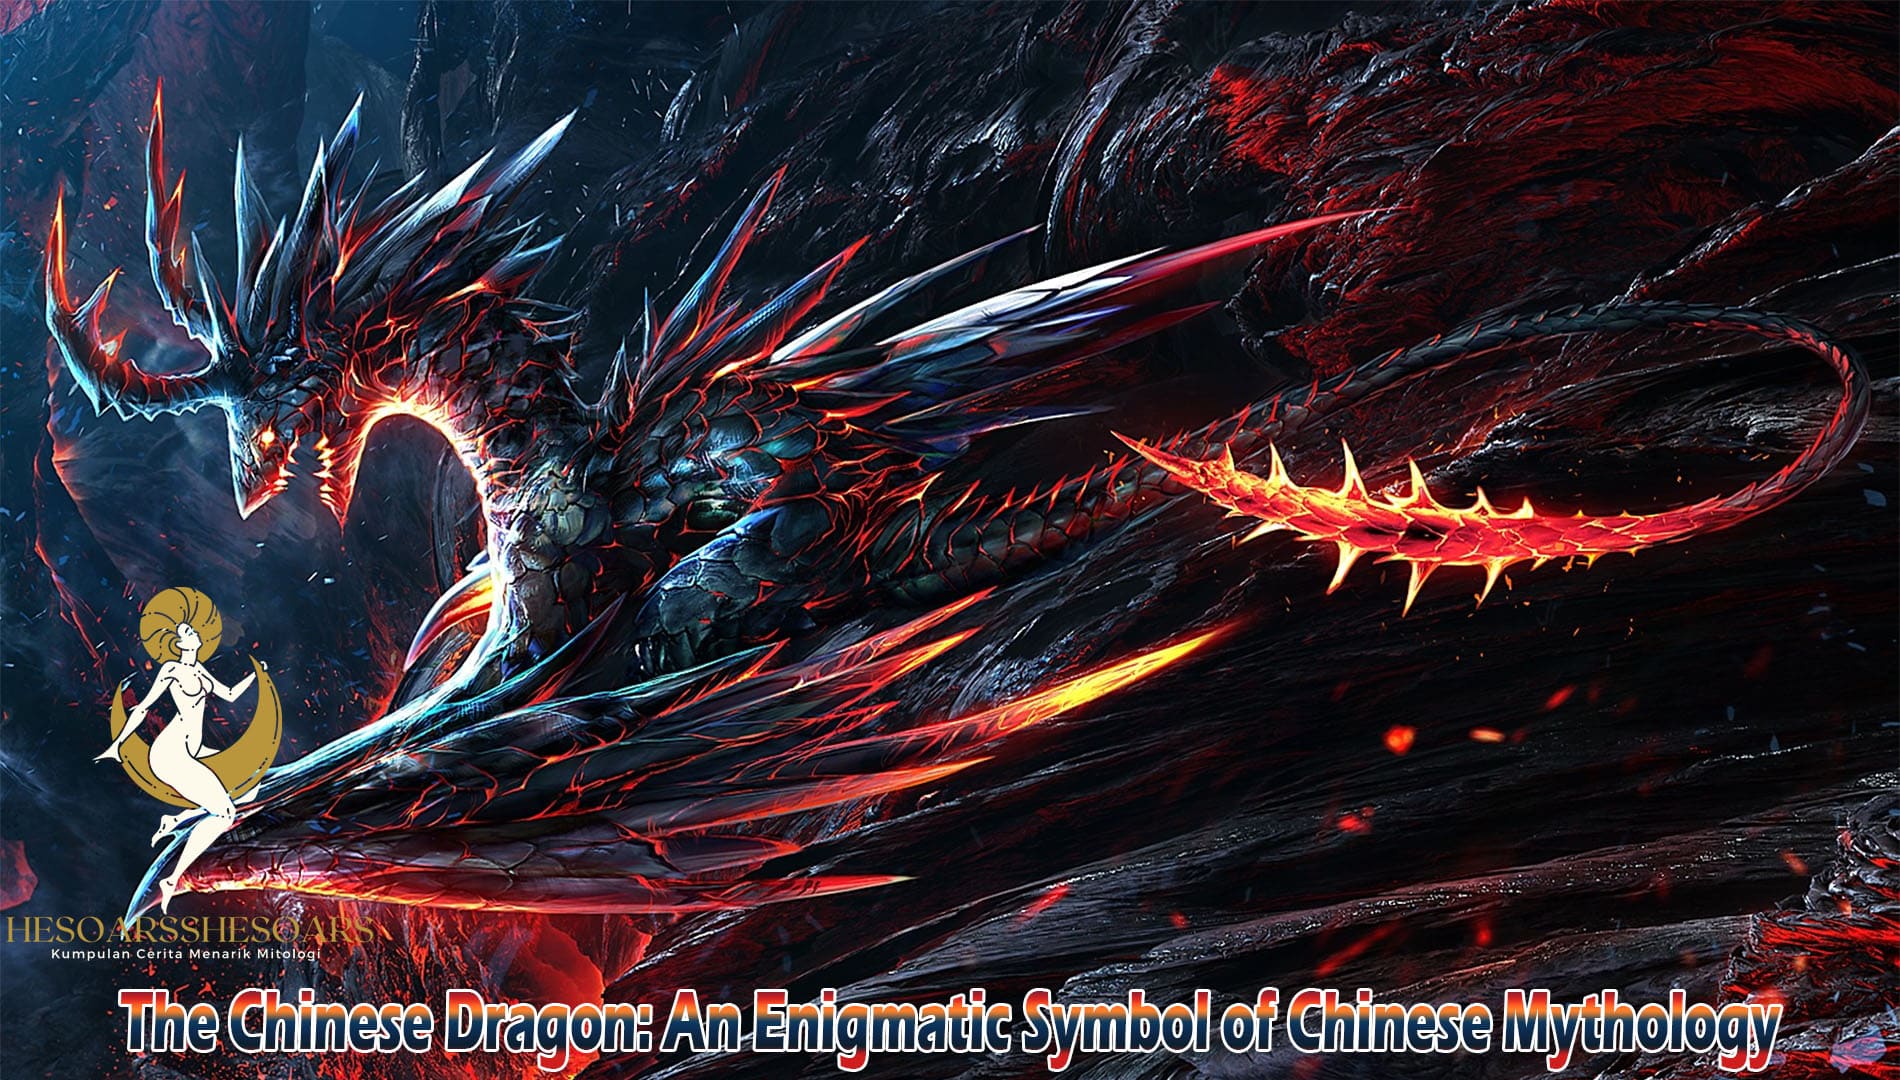 The Chinese Dragon: An Enigmatic Symbol of Chinese Mythology